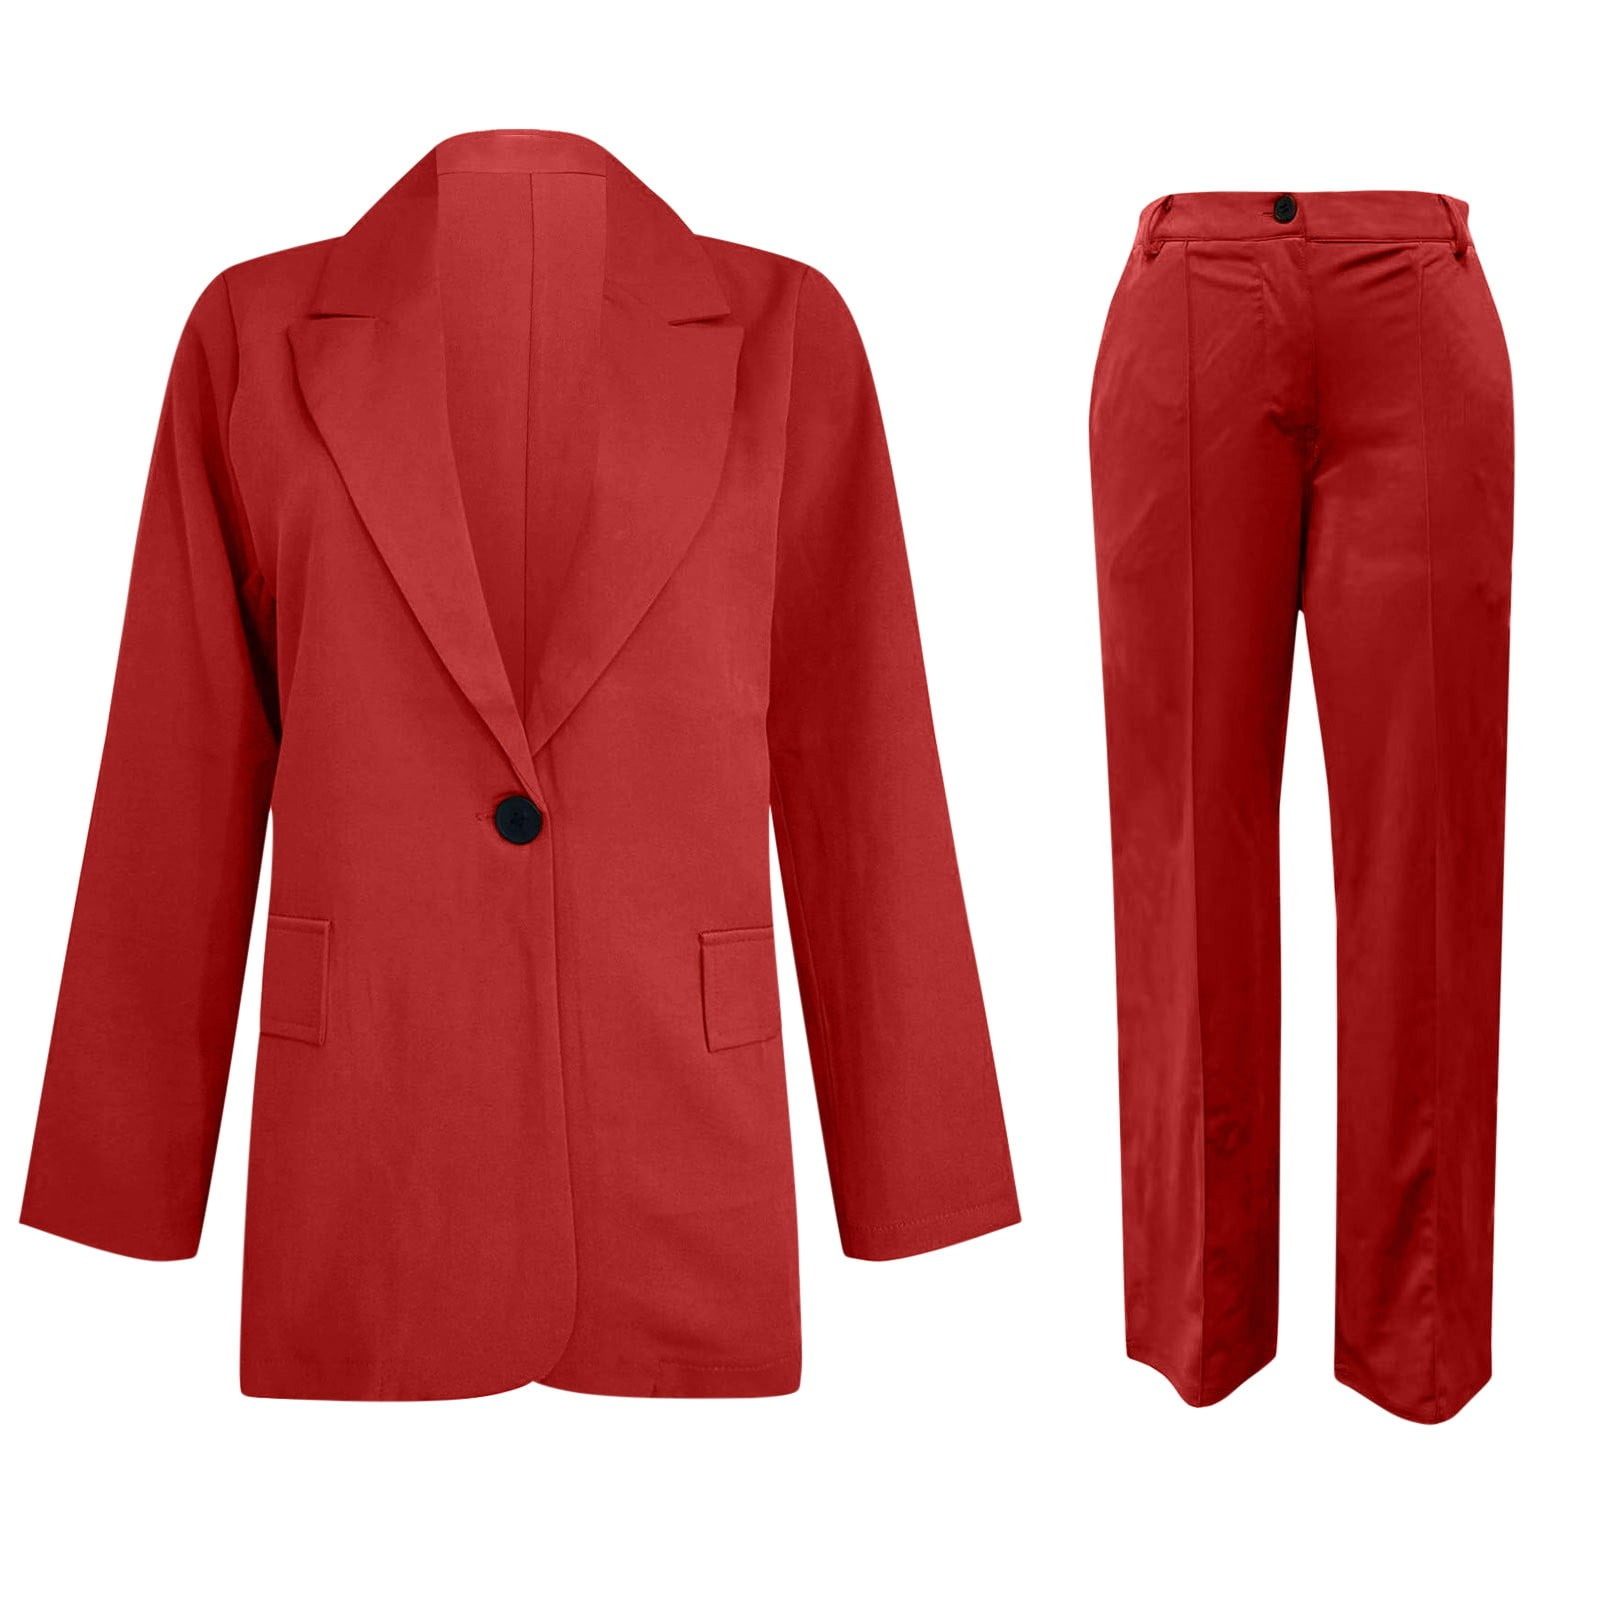 Blazer Sets Women 2 Piece Business Casual Outfits Classic Long Sleeve Notch  Lapel Suit Jacket and Pant Plus Size (3X-Large, Red) 